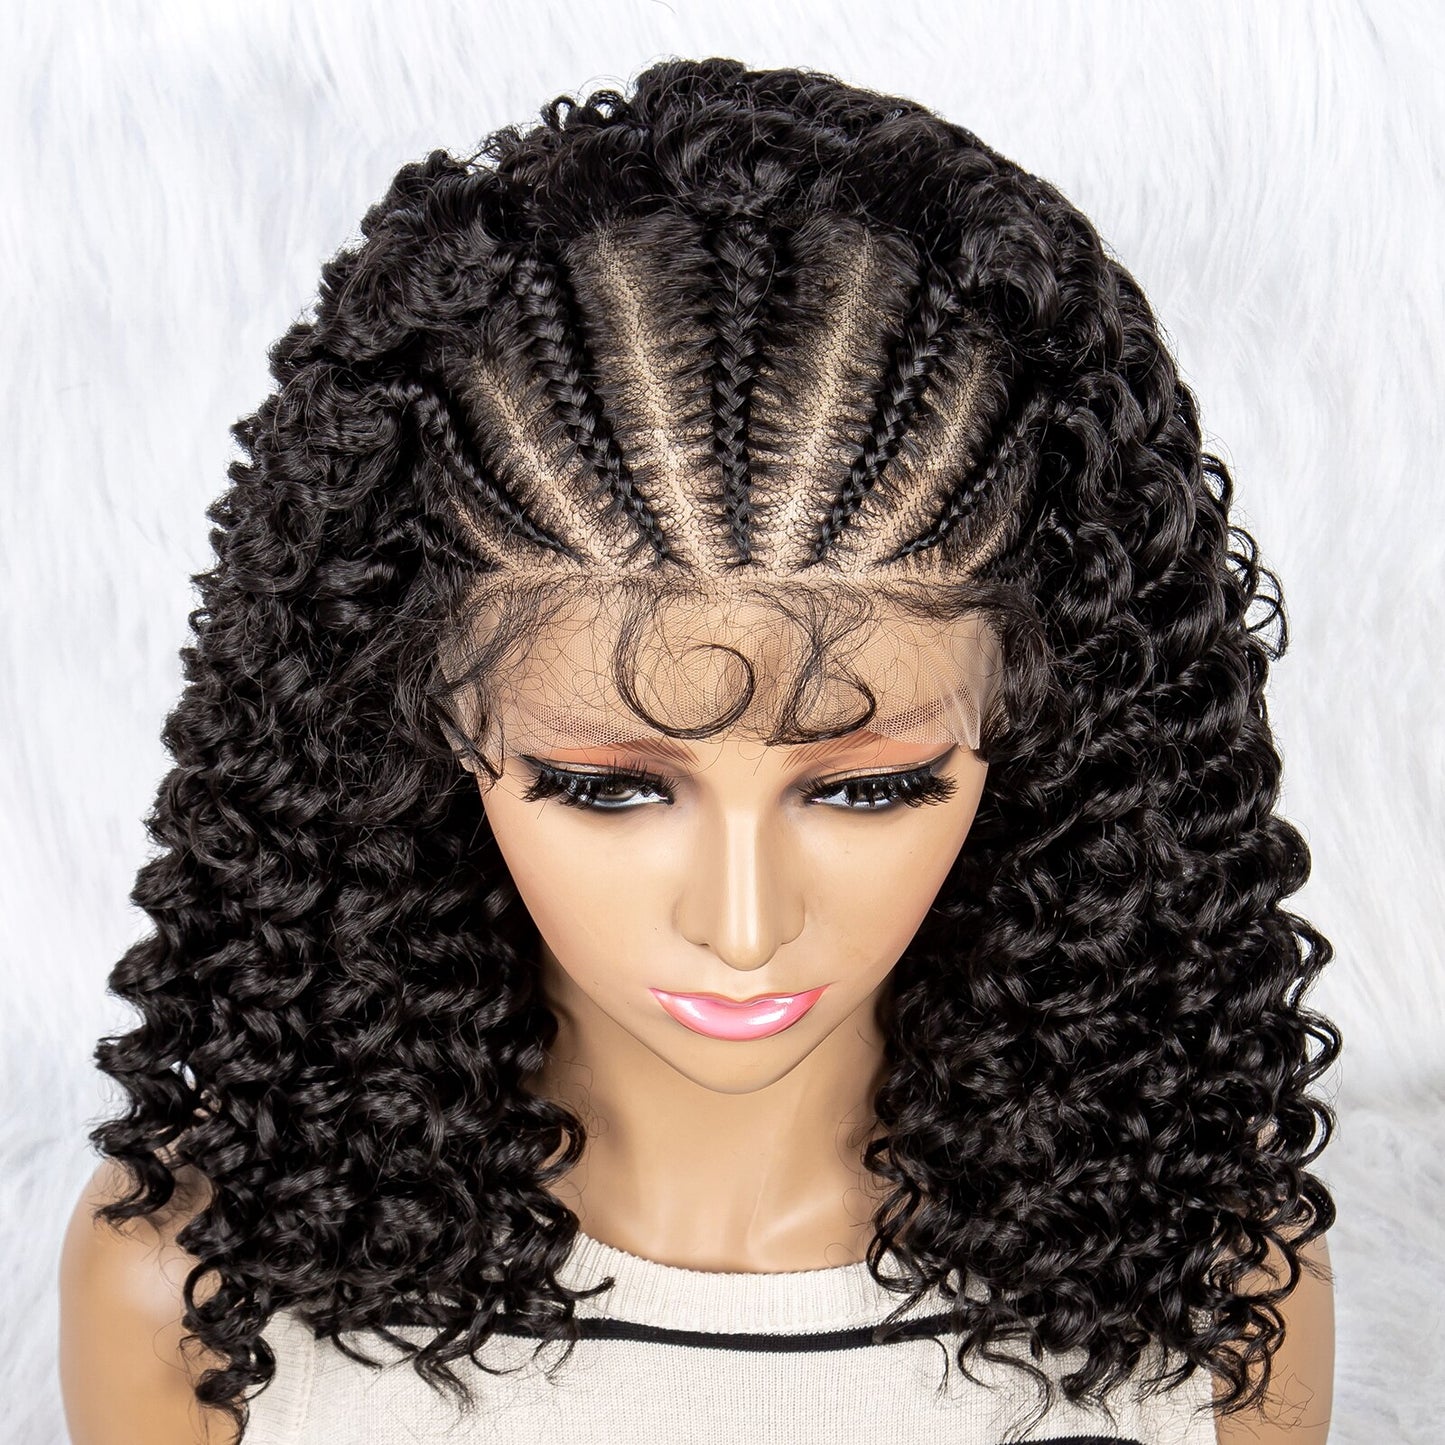 Braided Wigs Synthetic Lace Front Wig Braided Wigs With Baby Hair For Black Women Wig Kinky Curly Hair Wigs Curly Bob Wig